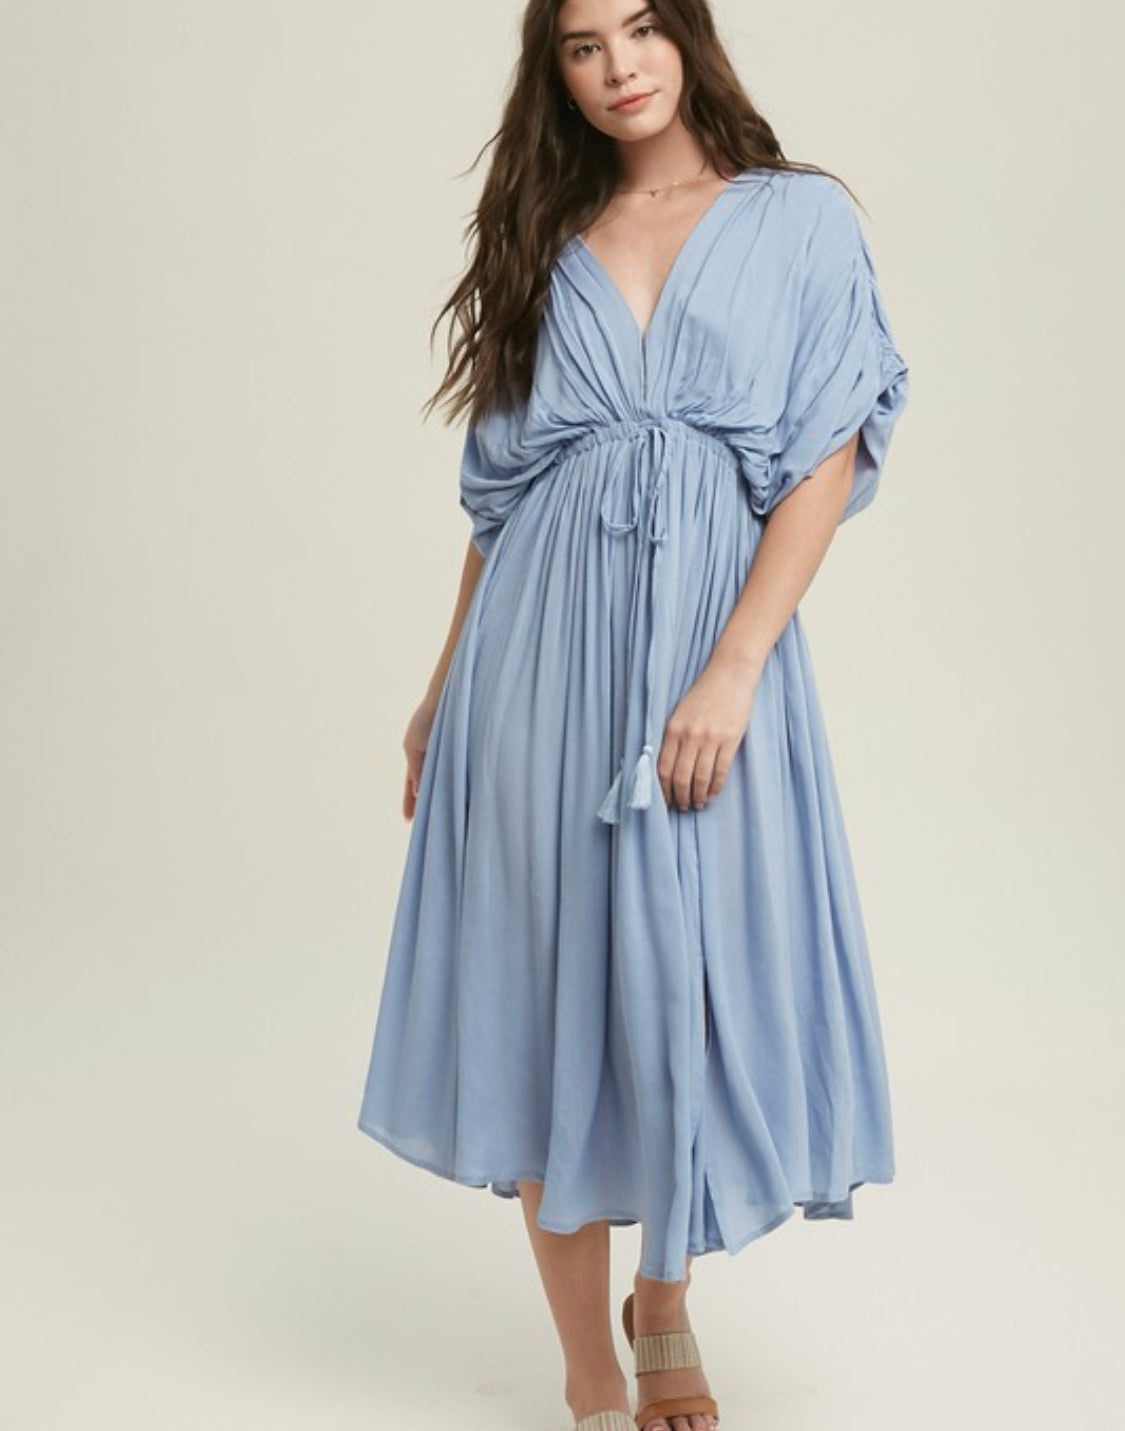 Come Fly With Me Midi Dress